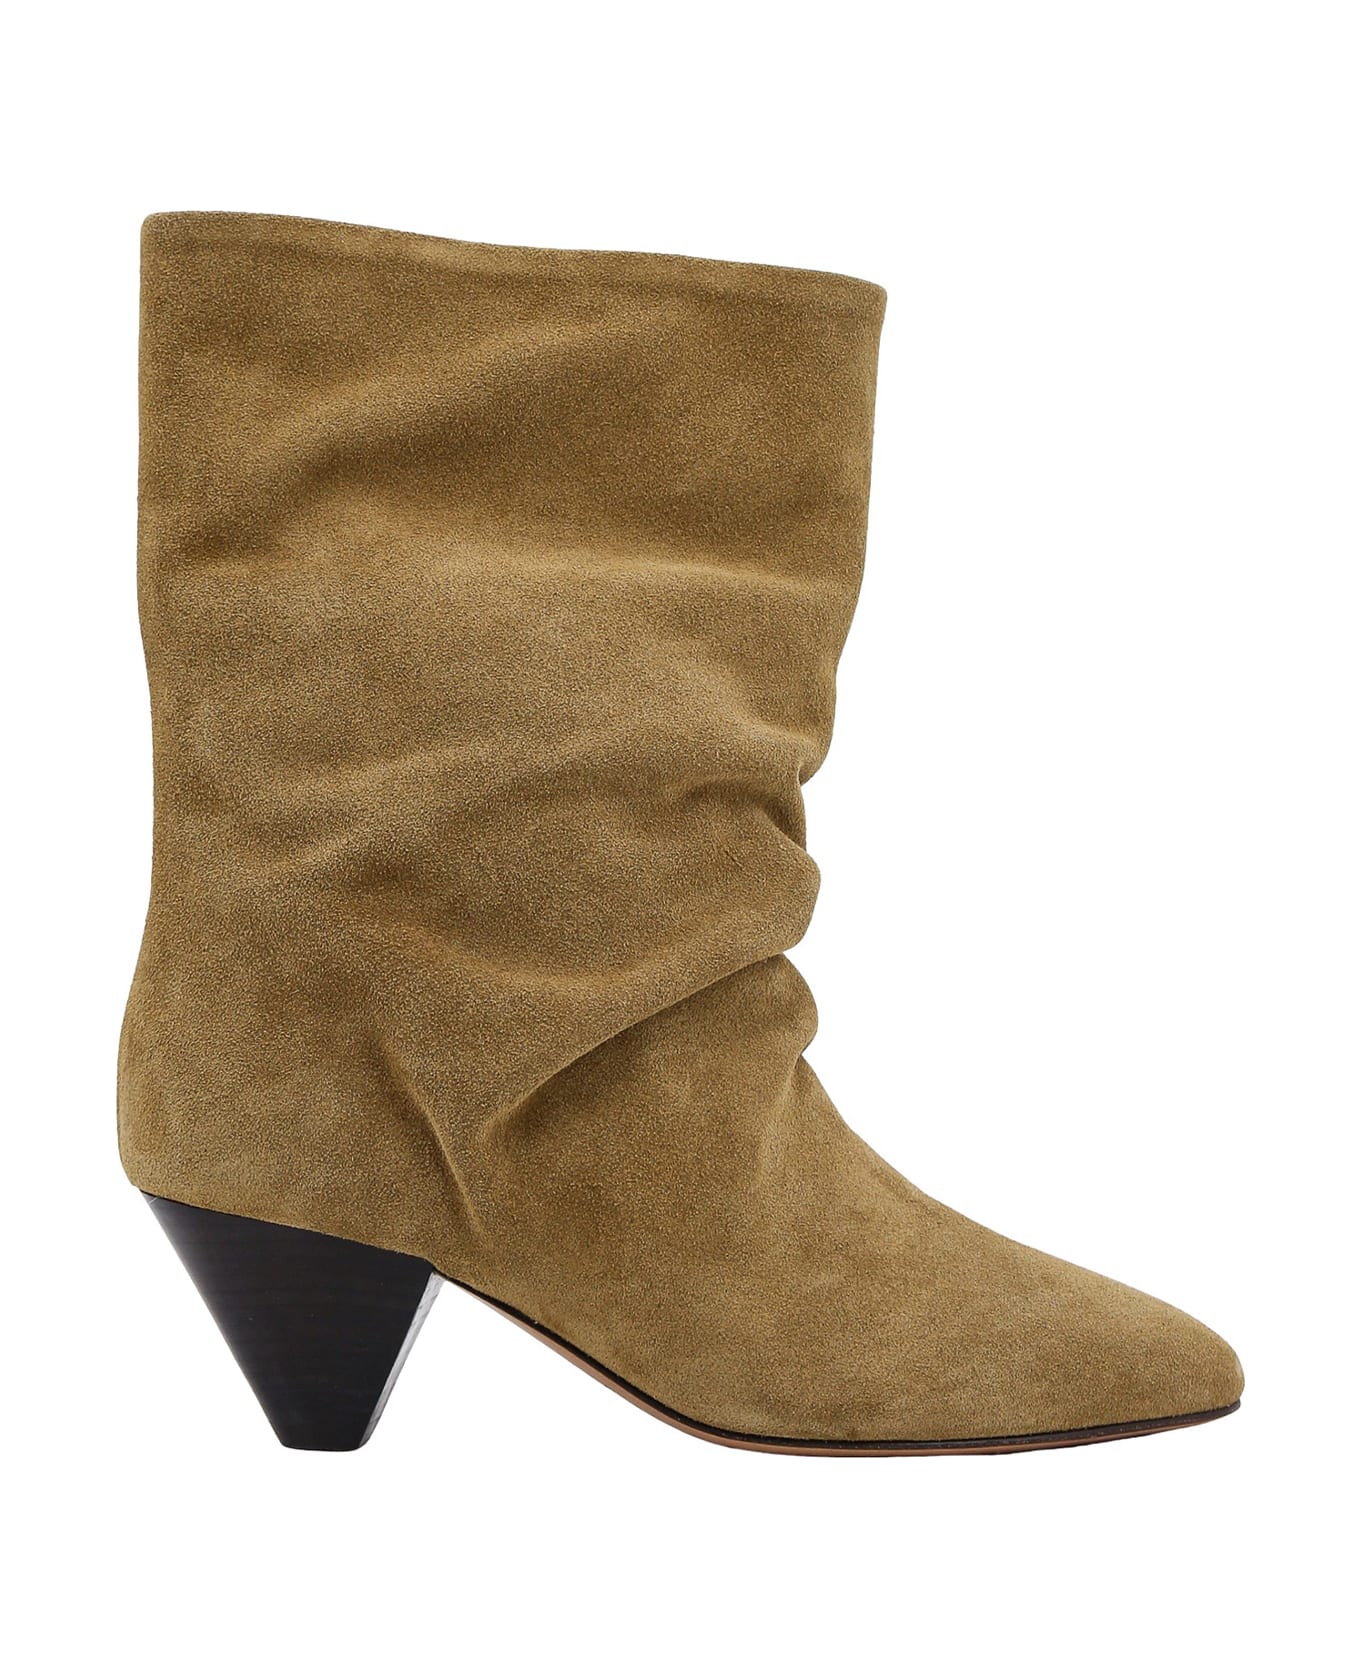 Isabel Marant Reachi Ankle Boots - Dove Grey ブーツ